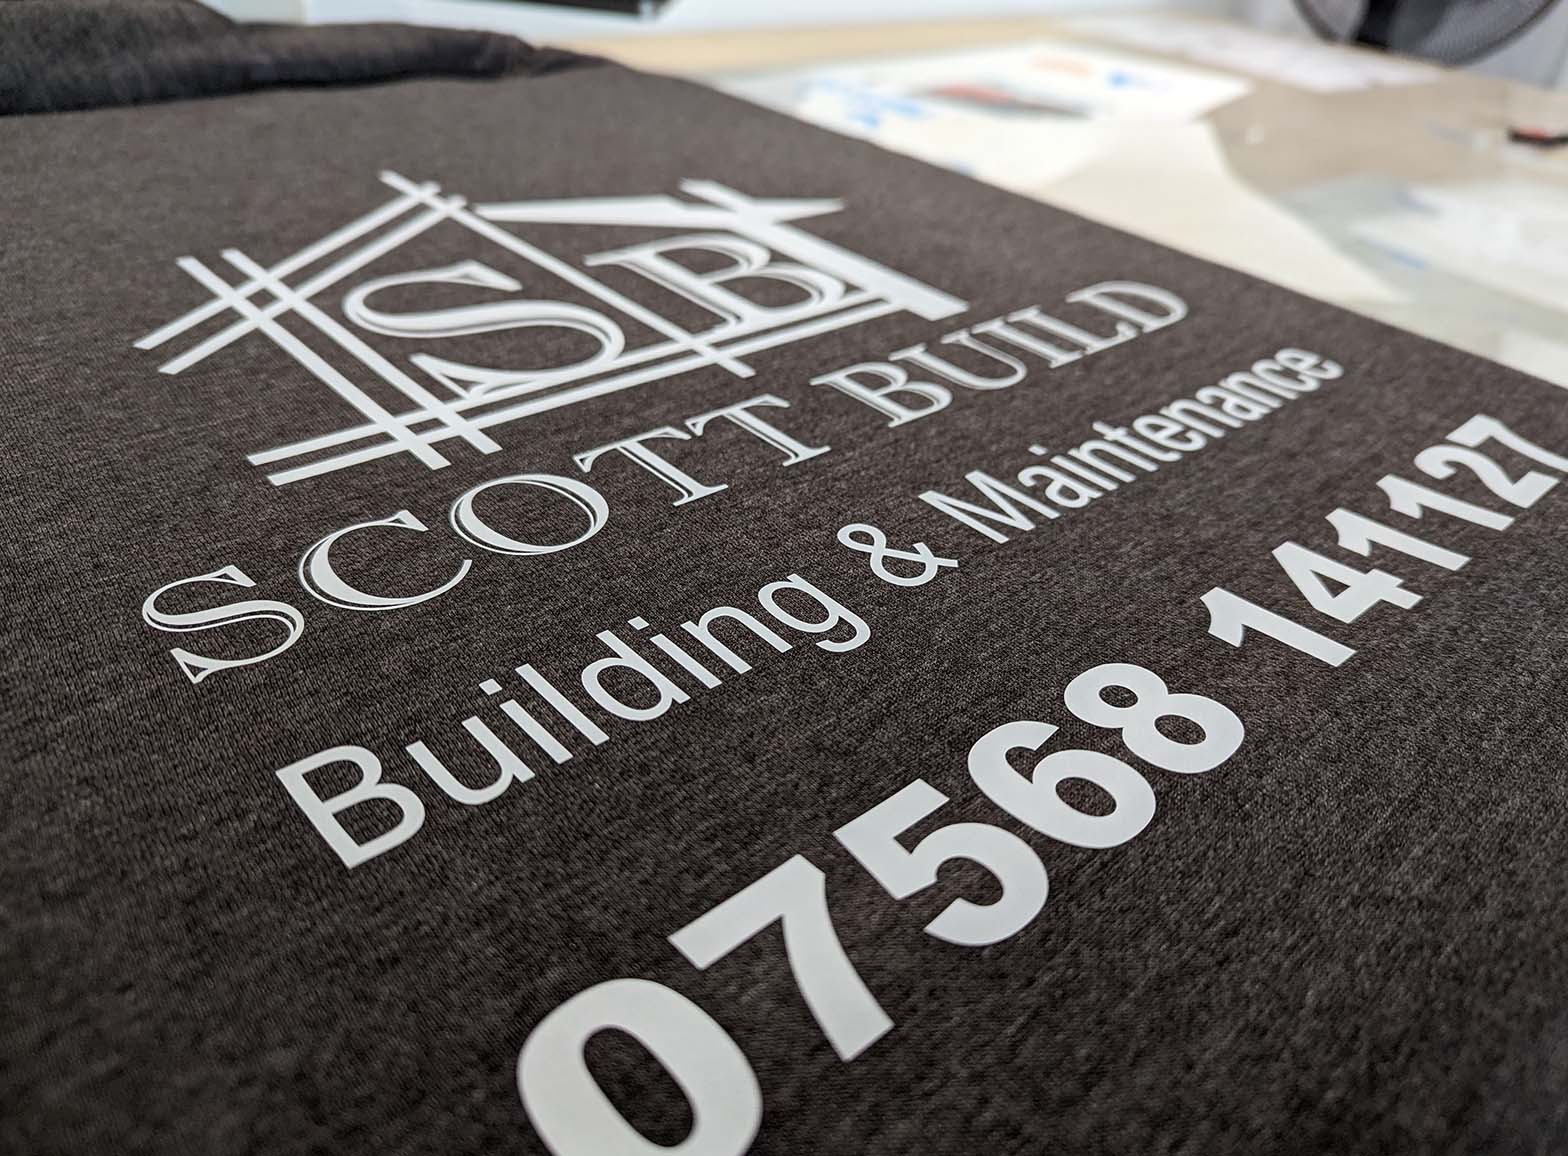 A photo of the Full Colour Vinyl Print process for a job for Scott Build, completed by Clothing Your Way in Paignton, South Devon.